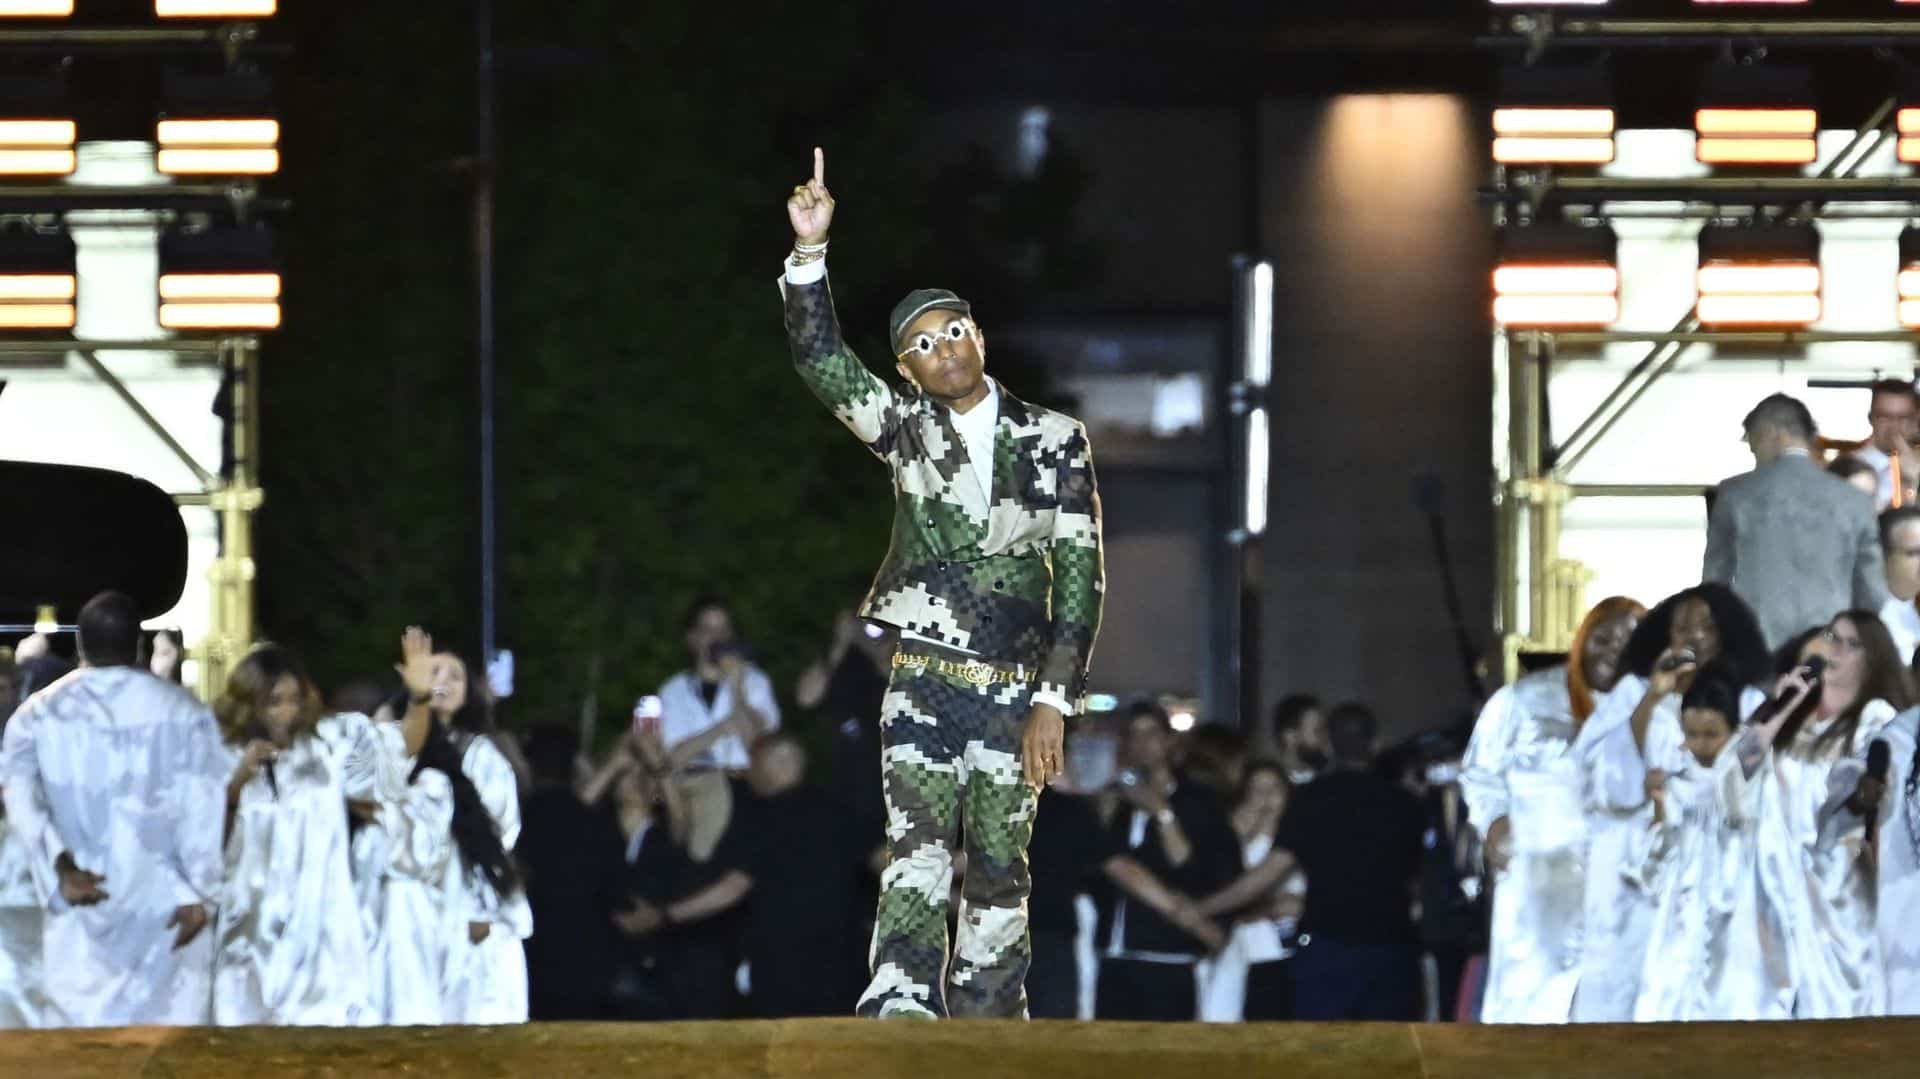 Louis Vuitton: Pharrell Williams puts on a dazzling entrance show